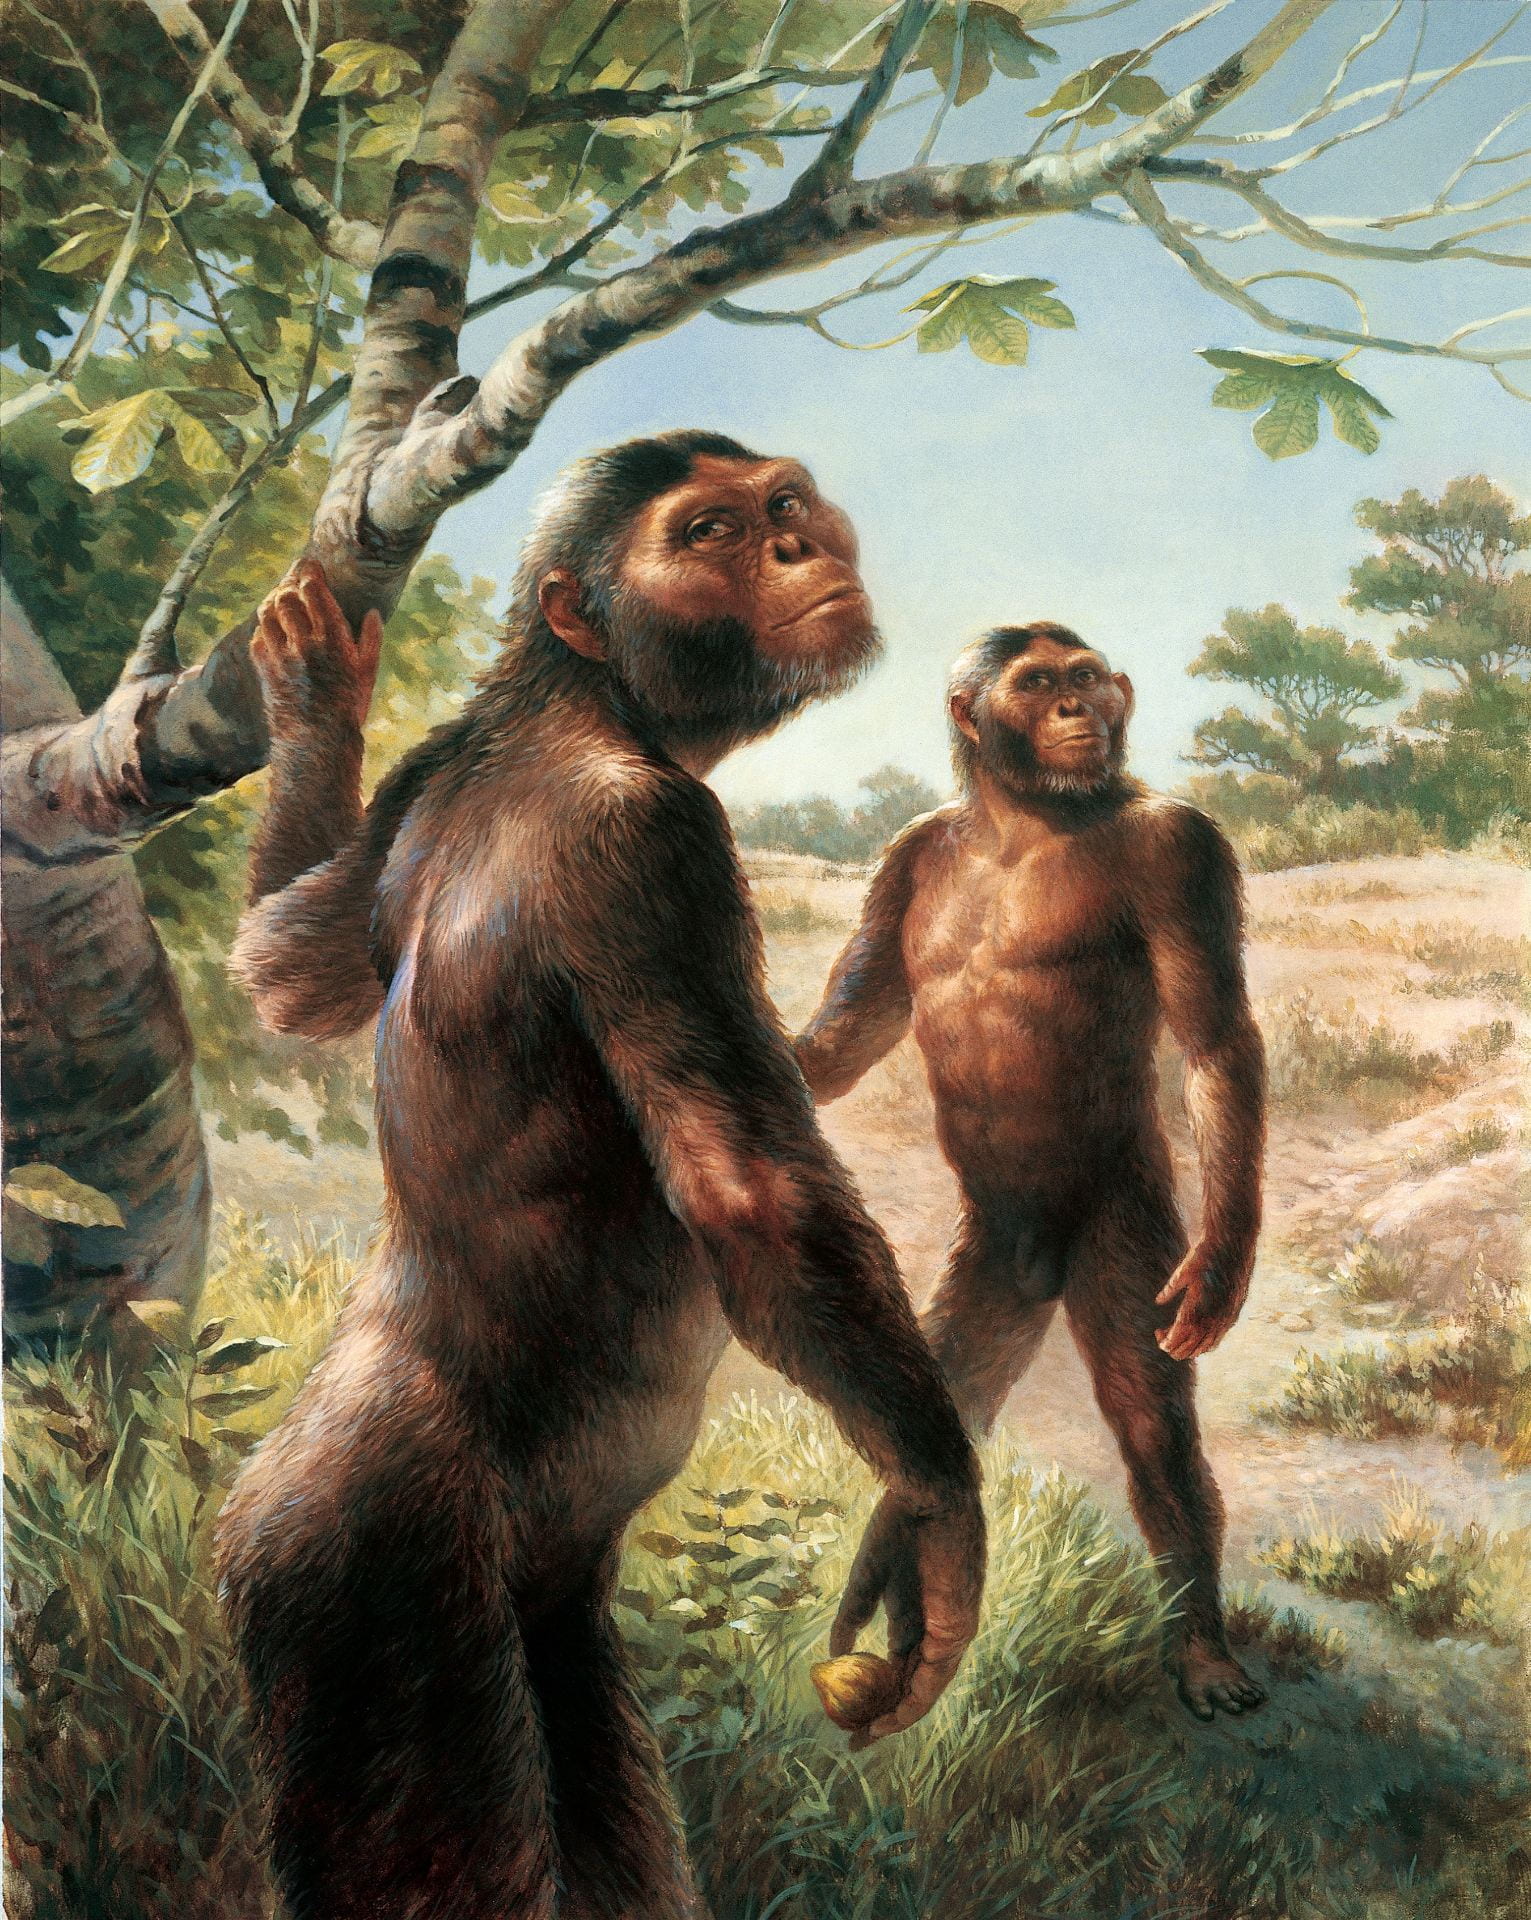 An artist’s rendering of two Australopithecus afarensis. They are both standing upright and are partially covered in black hair all over their bodies. One is grabbing a low tree branch.